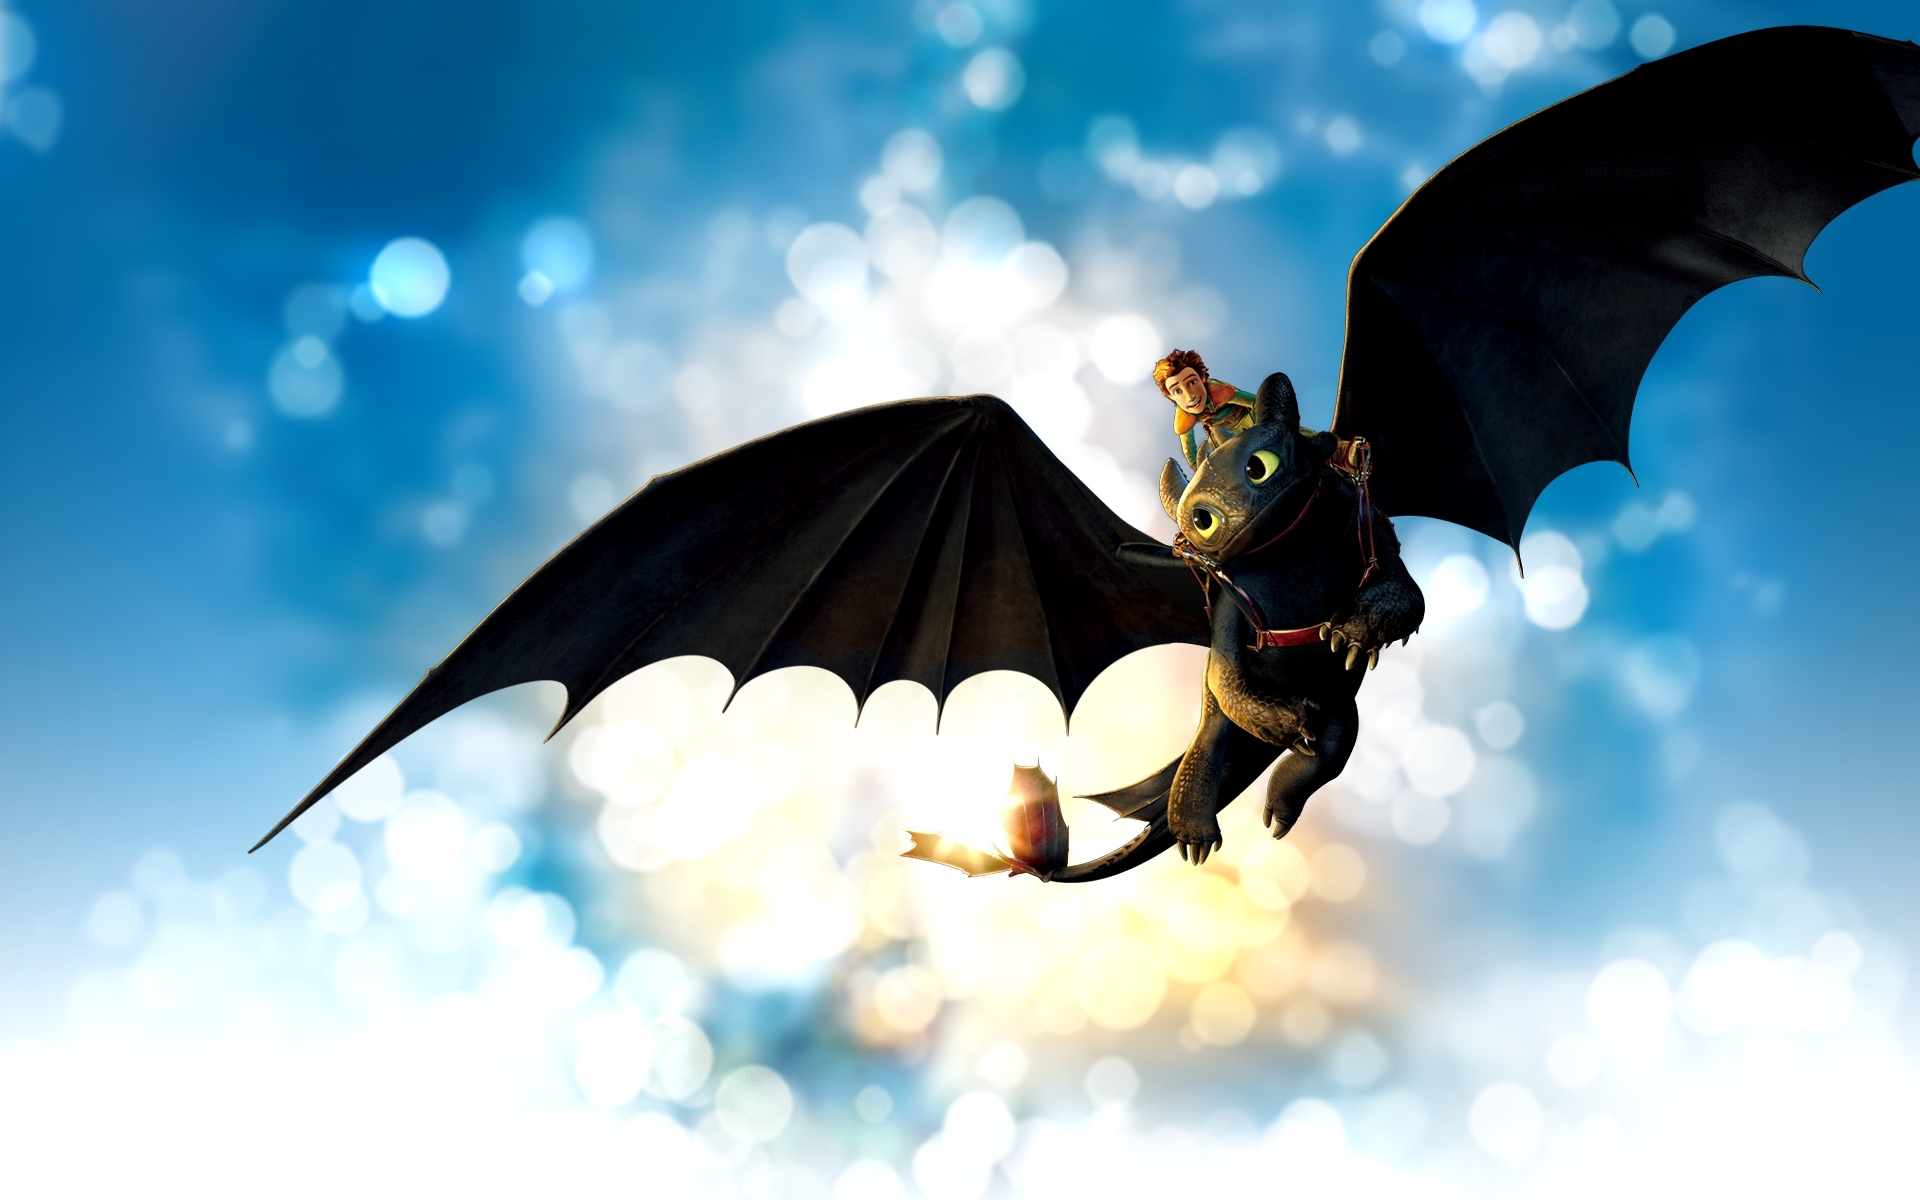 Free download 103 Toothless How to Train Your Dragon HD Wallpapers  1920x1200 for your Desktop Mobile  Tablet  Explore 21 Cute Dragon  Wallpapers  Dragon Wallpaper Dragon Wallpapers Free Dragon Wallpapers